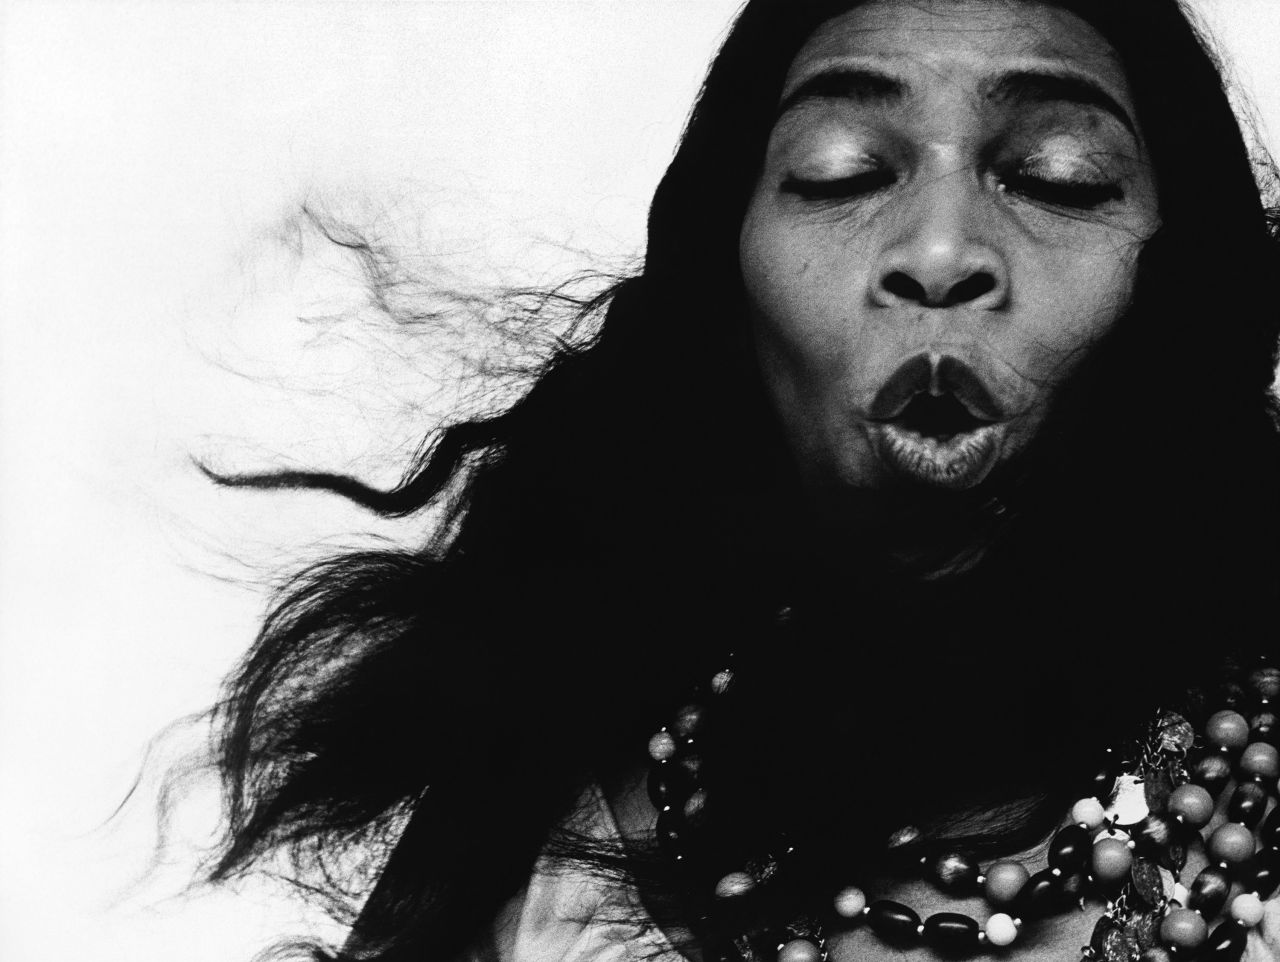 Gallerist and art critic Antwaun Sargent called this portrait of groundbreaking opera singer Marian Anderson 